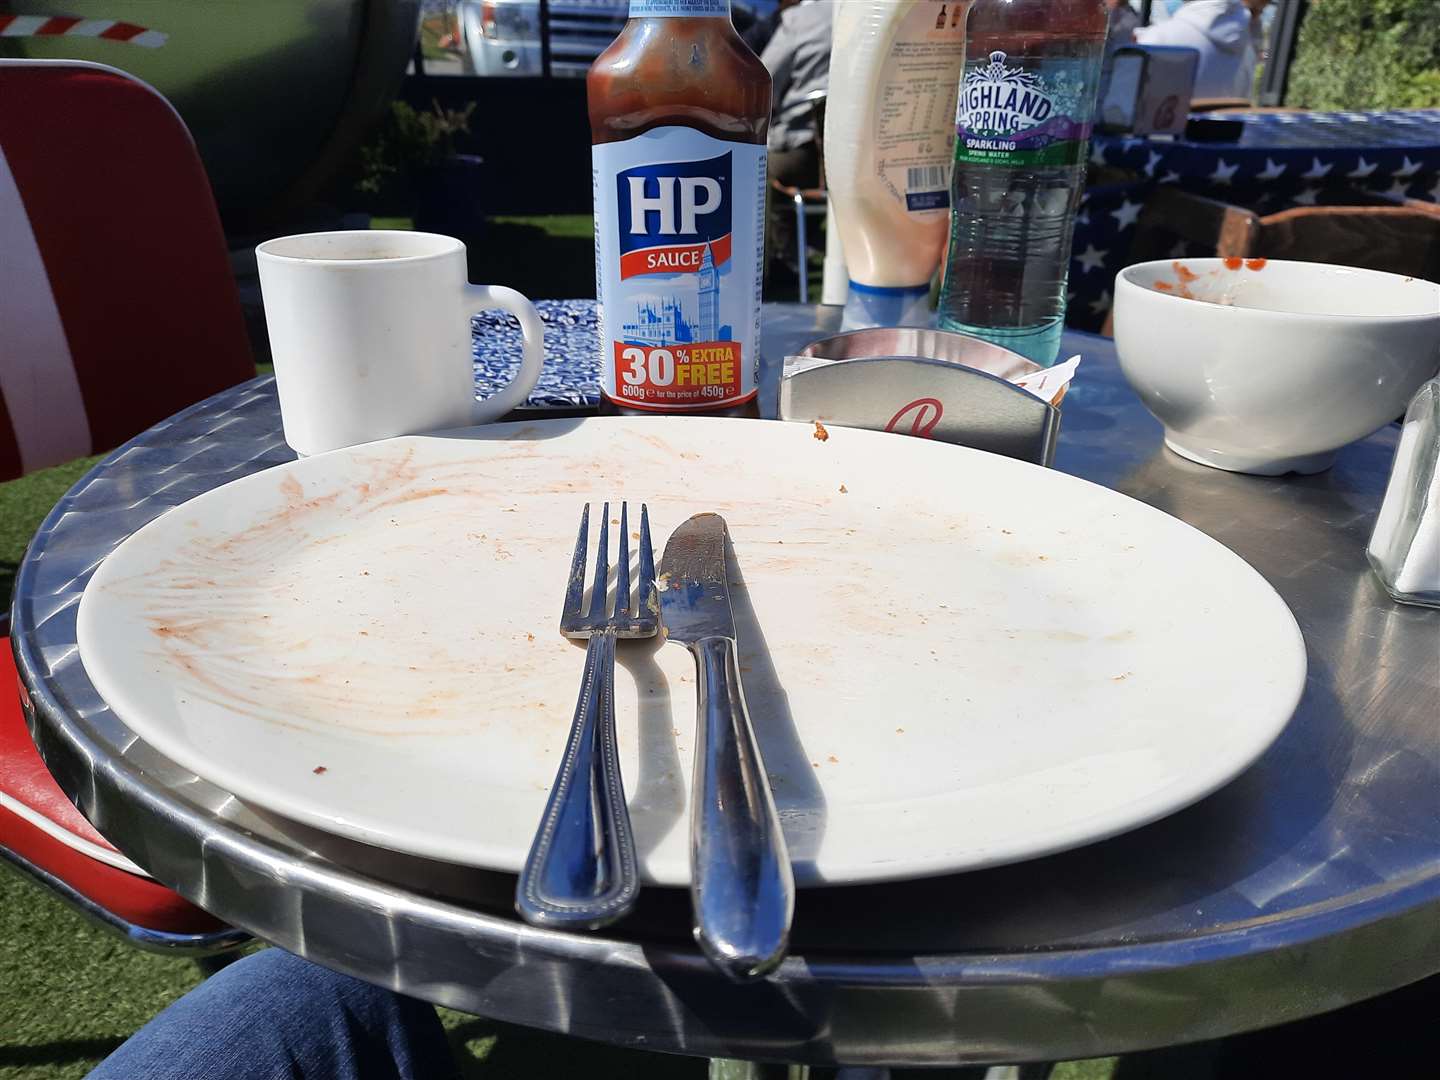 Jack's plate was cleared shortly after it arrived at his table